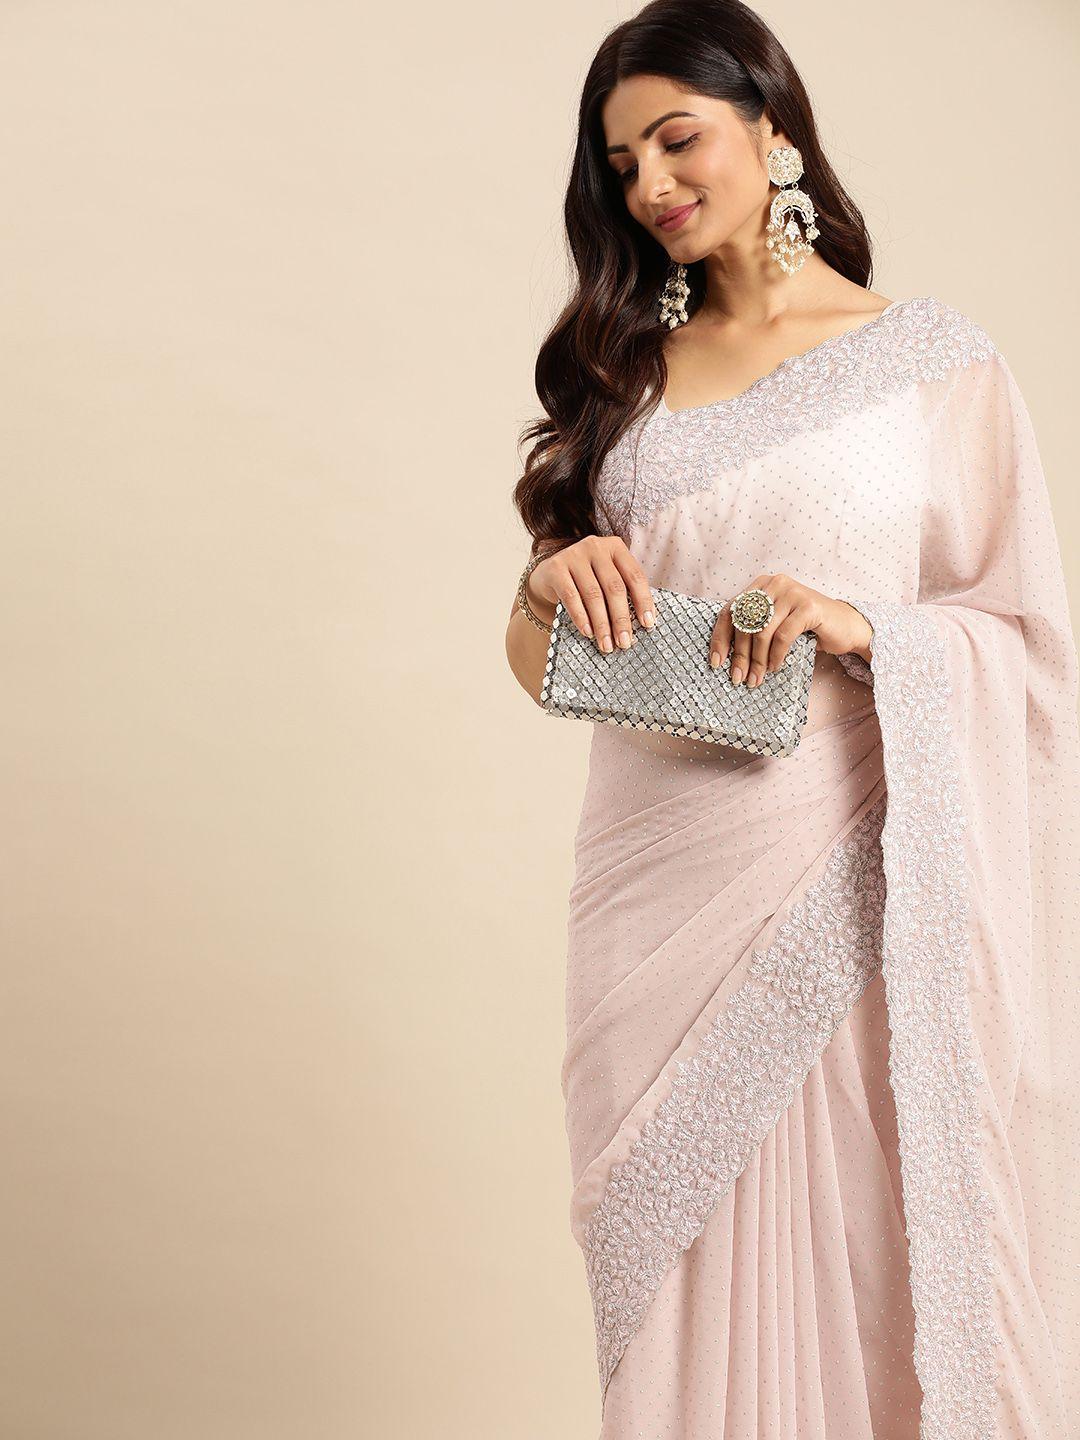 kasee embellished beads and stones saree